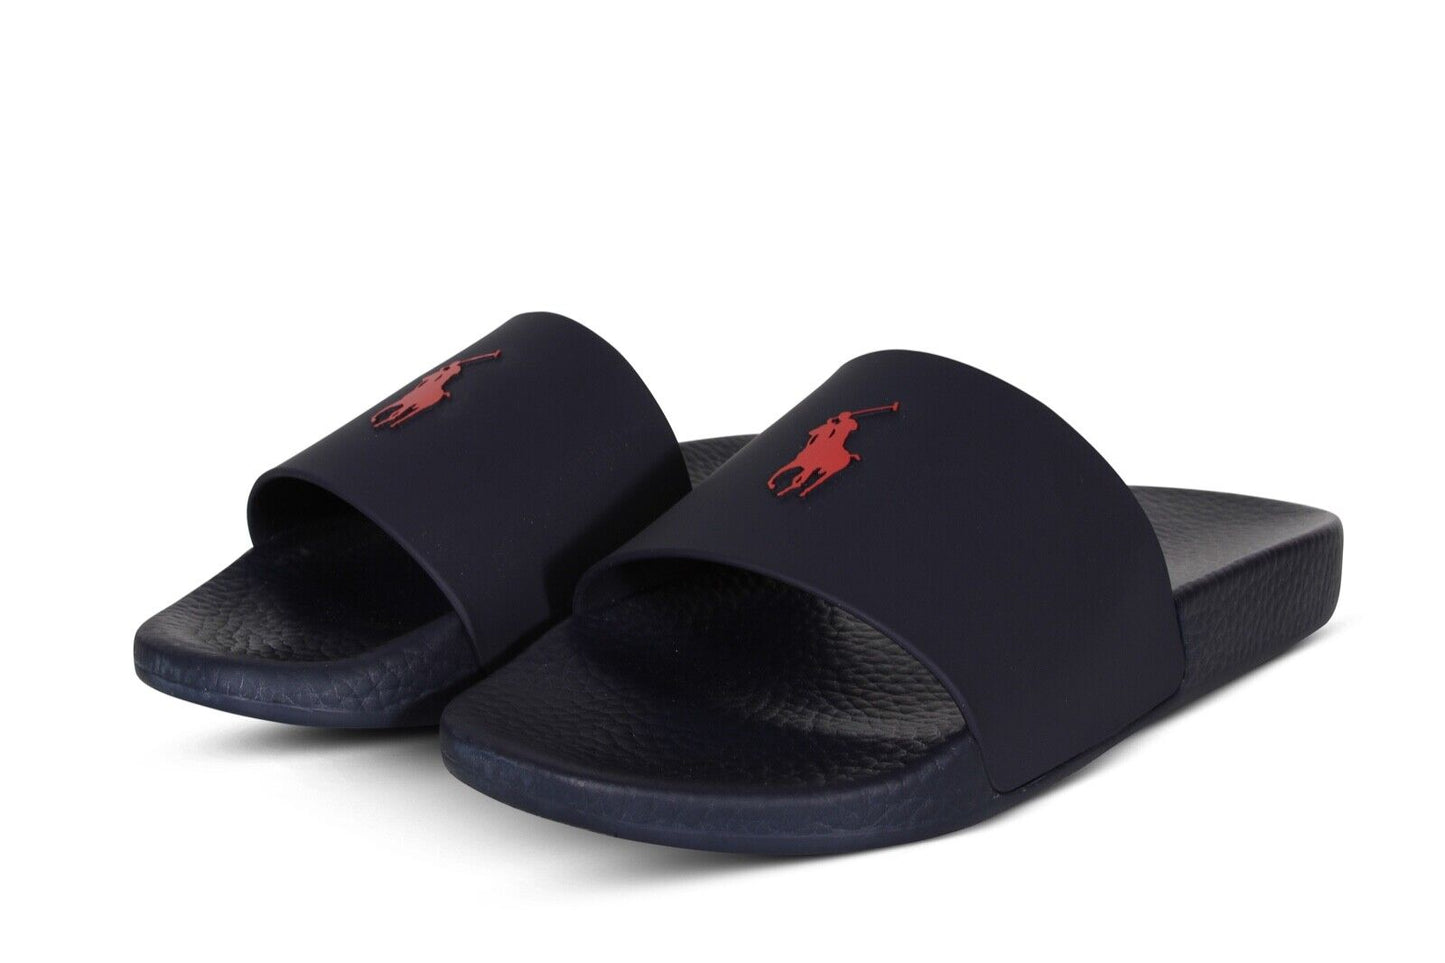 Polo Ralph Lauren Signature Pony Slide in Navy Blue and Red 809852071002